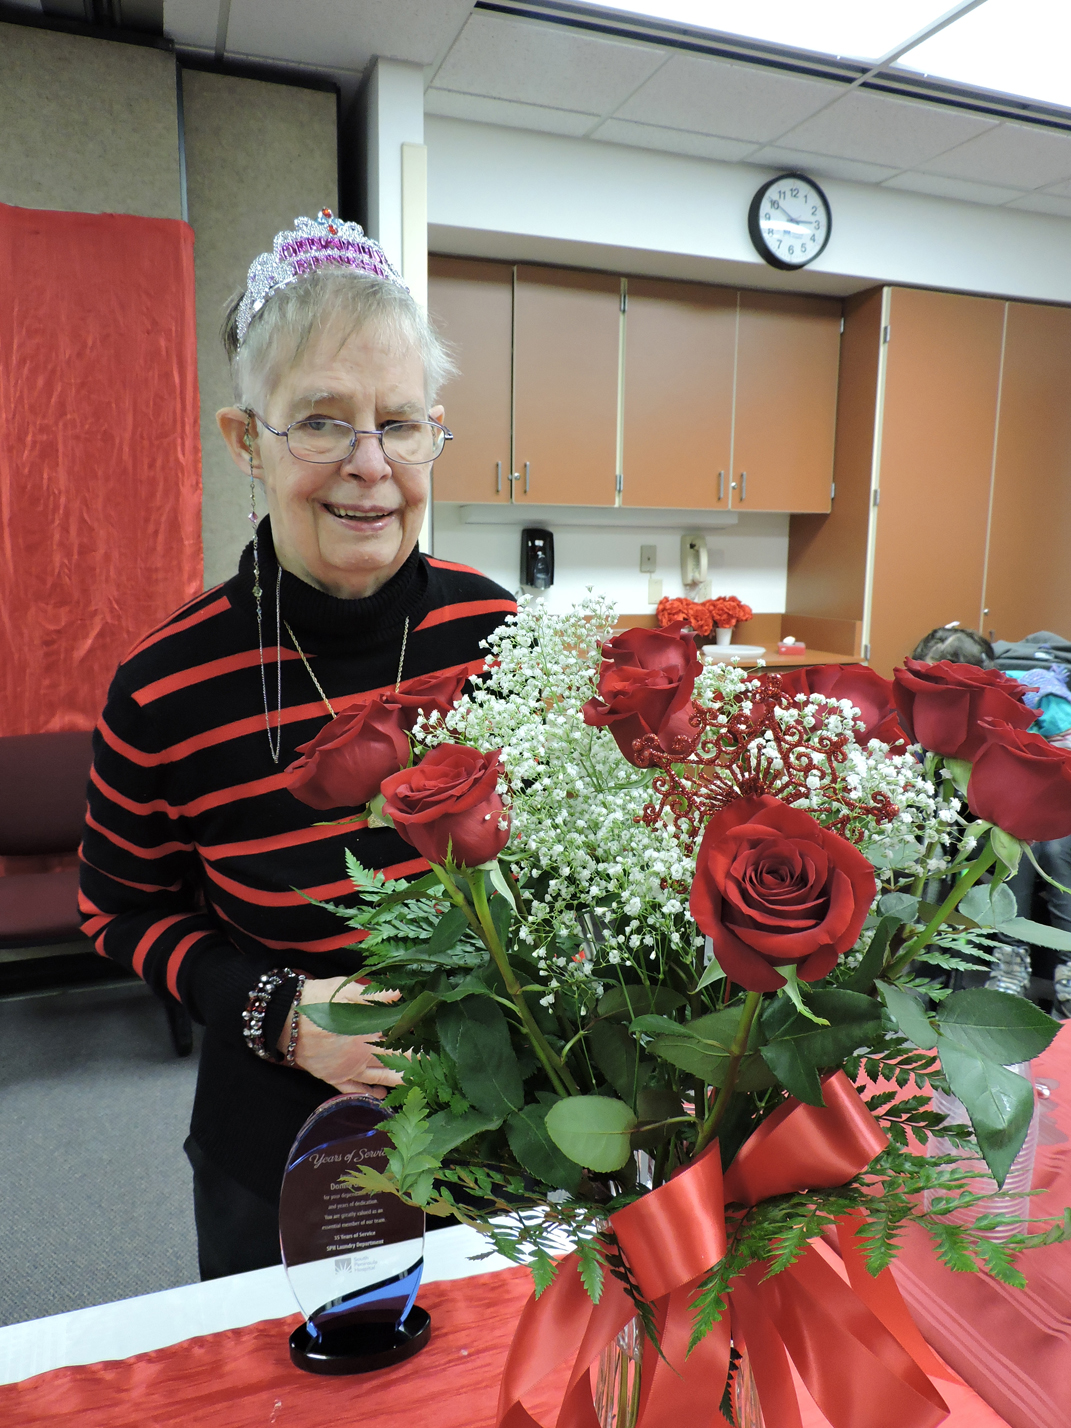 South Peninsula Hospital employee Donna Glover is honored during a retirement celebration in her honor Jan. 12. She received a bouquet of roses and a trophy recognizing her 35 years of service. Other gifts included a six-year subscription to the Homer News.  -Photo provided